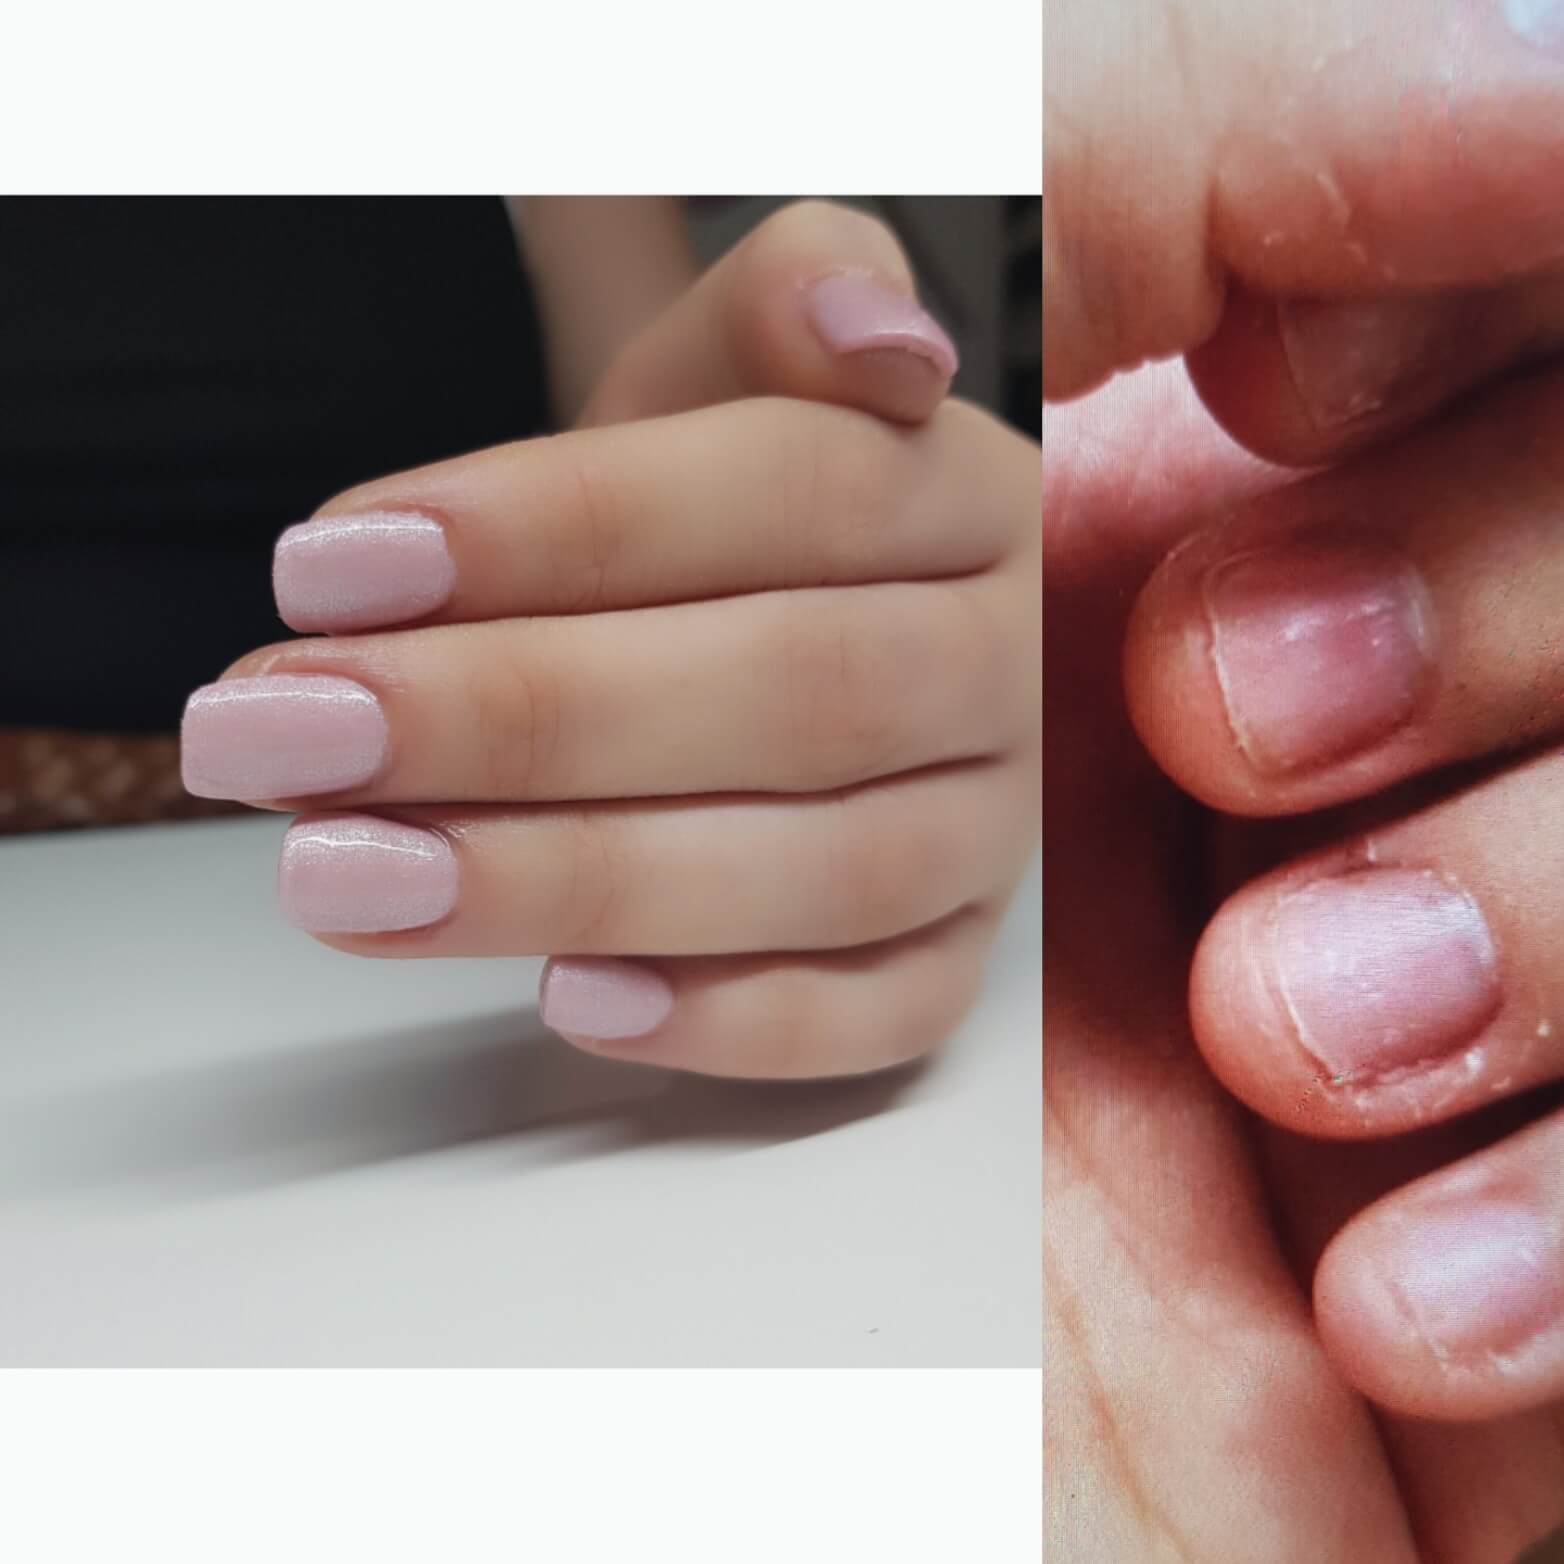 Can I get nail extensions if I bite my nails? | Figaro London